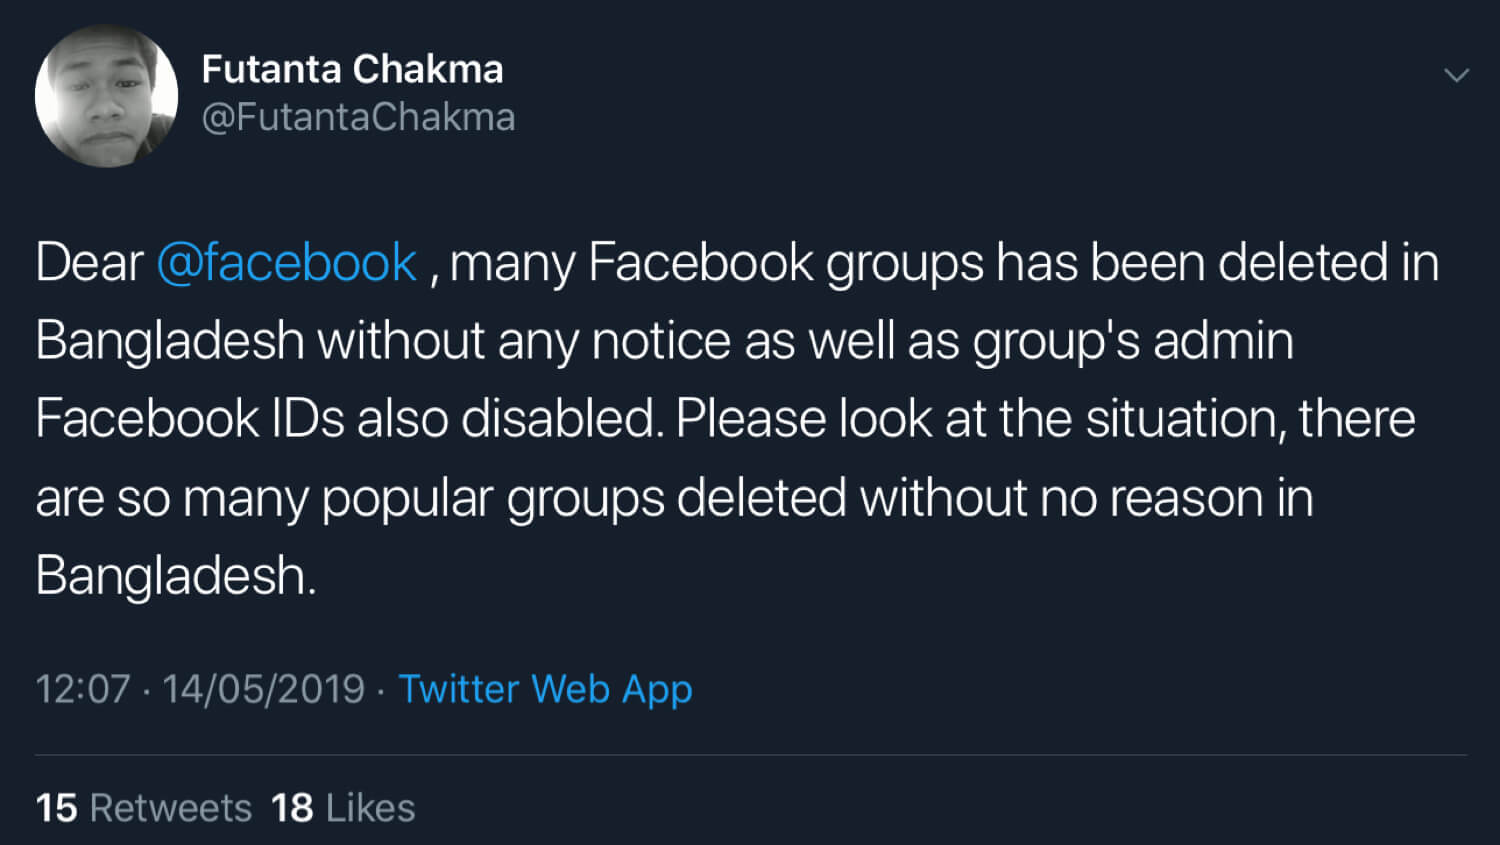 Futanta Chakma announcing that Facebook has deleted many groups in Bangladesh as well as the Facebook accounts of group admins.